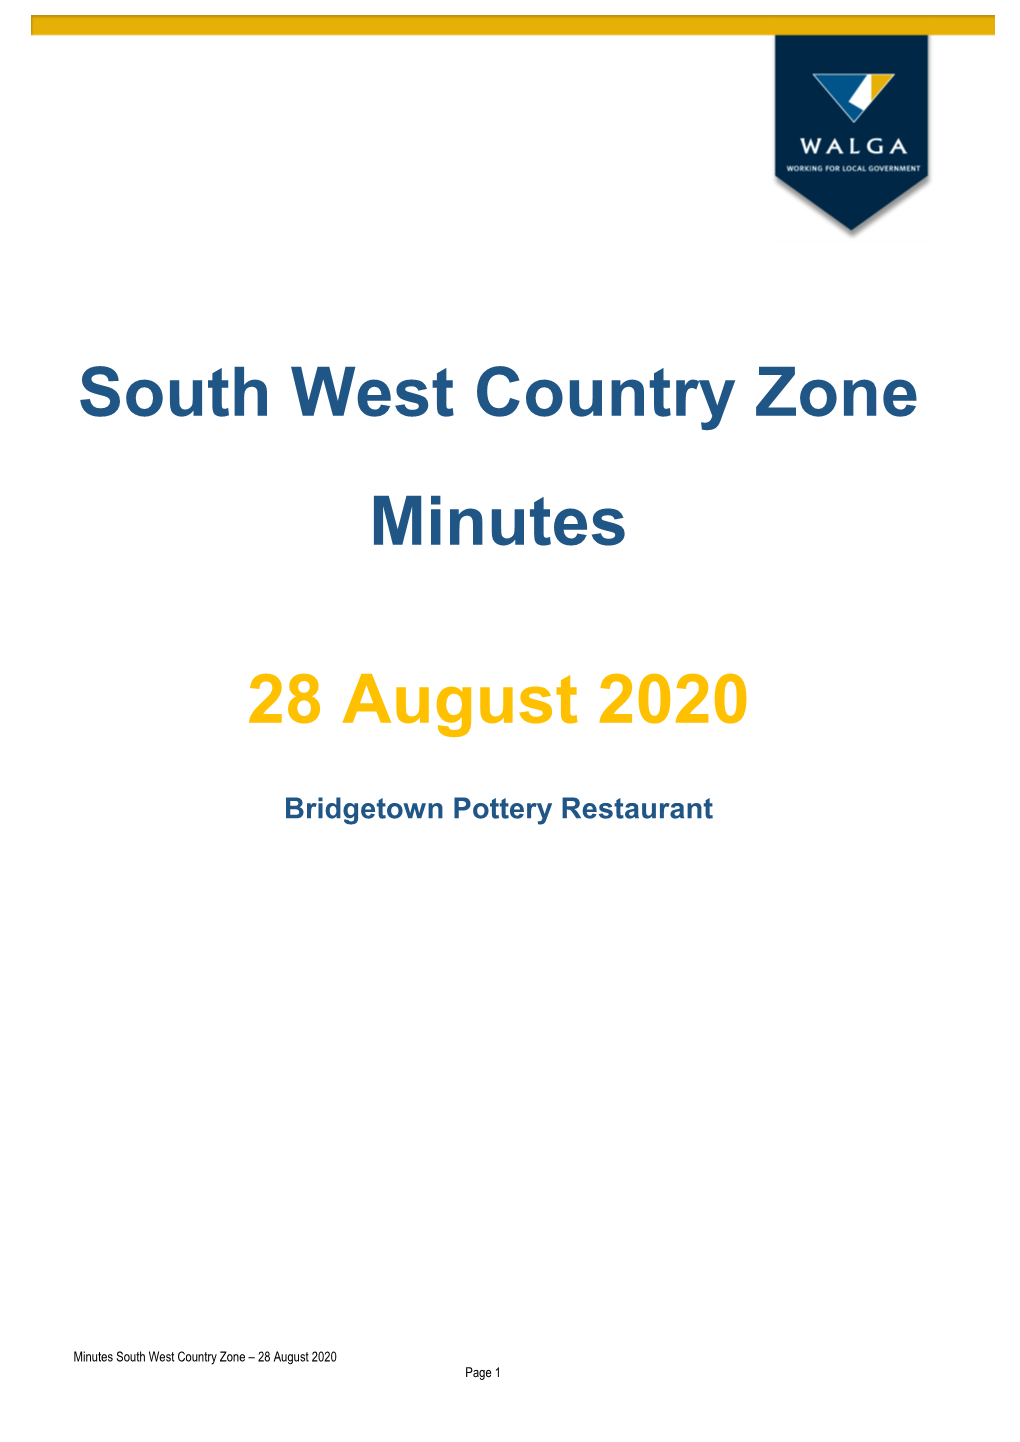 South West Country Zone Minutes 28 August 2020